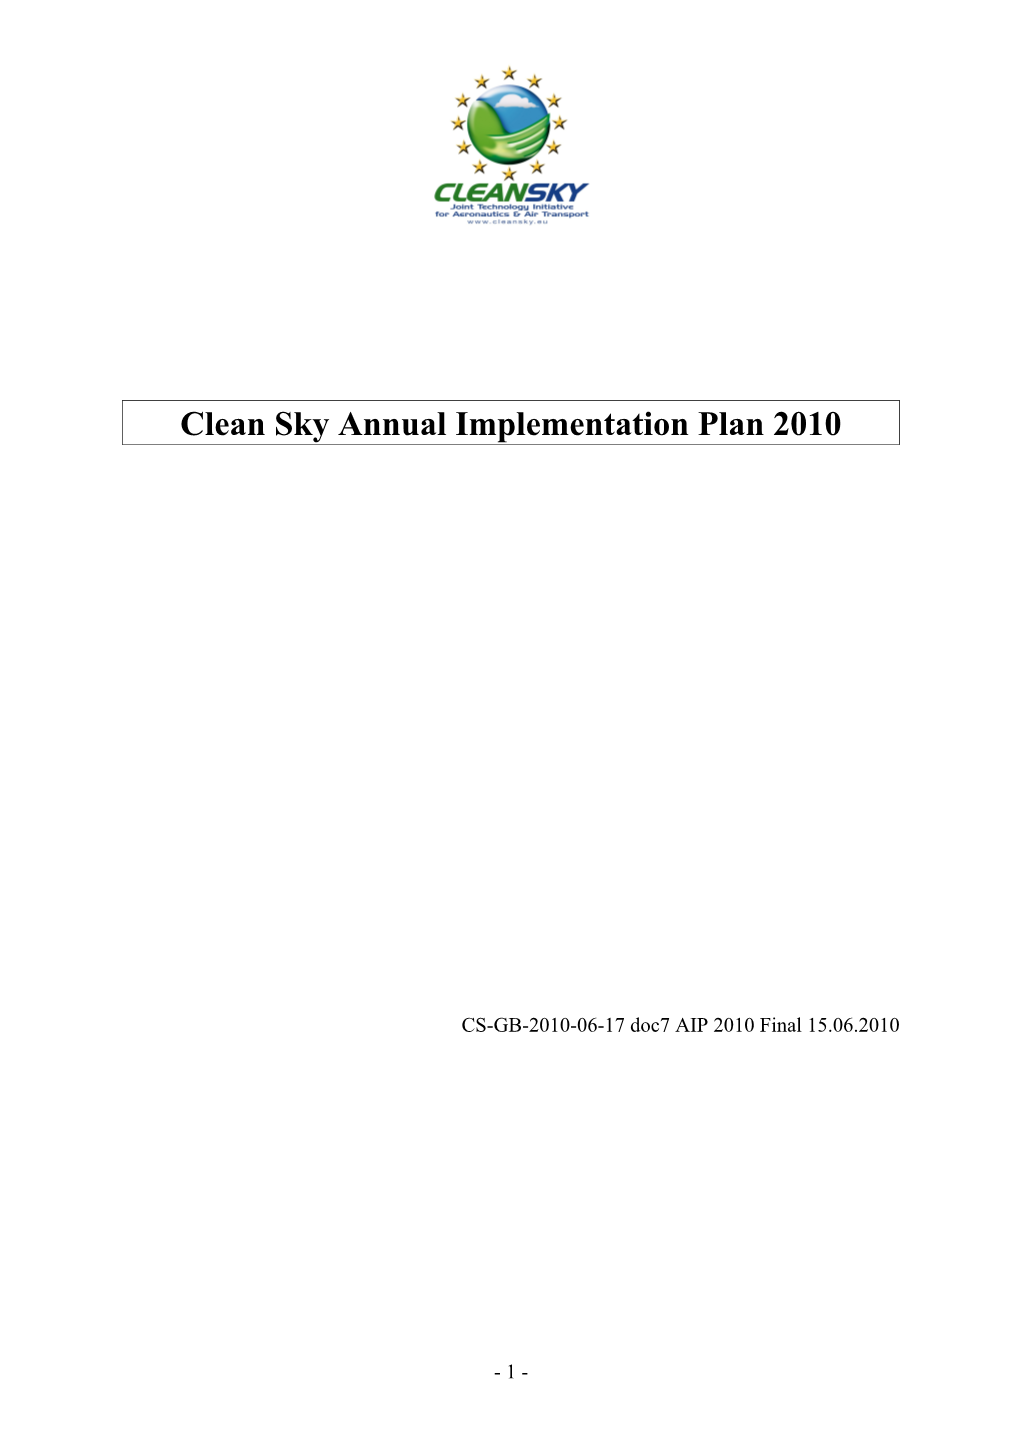 Clean Sky Annual Implementation Plan 2010